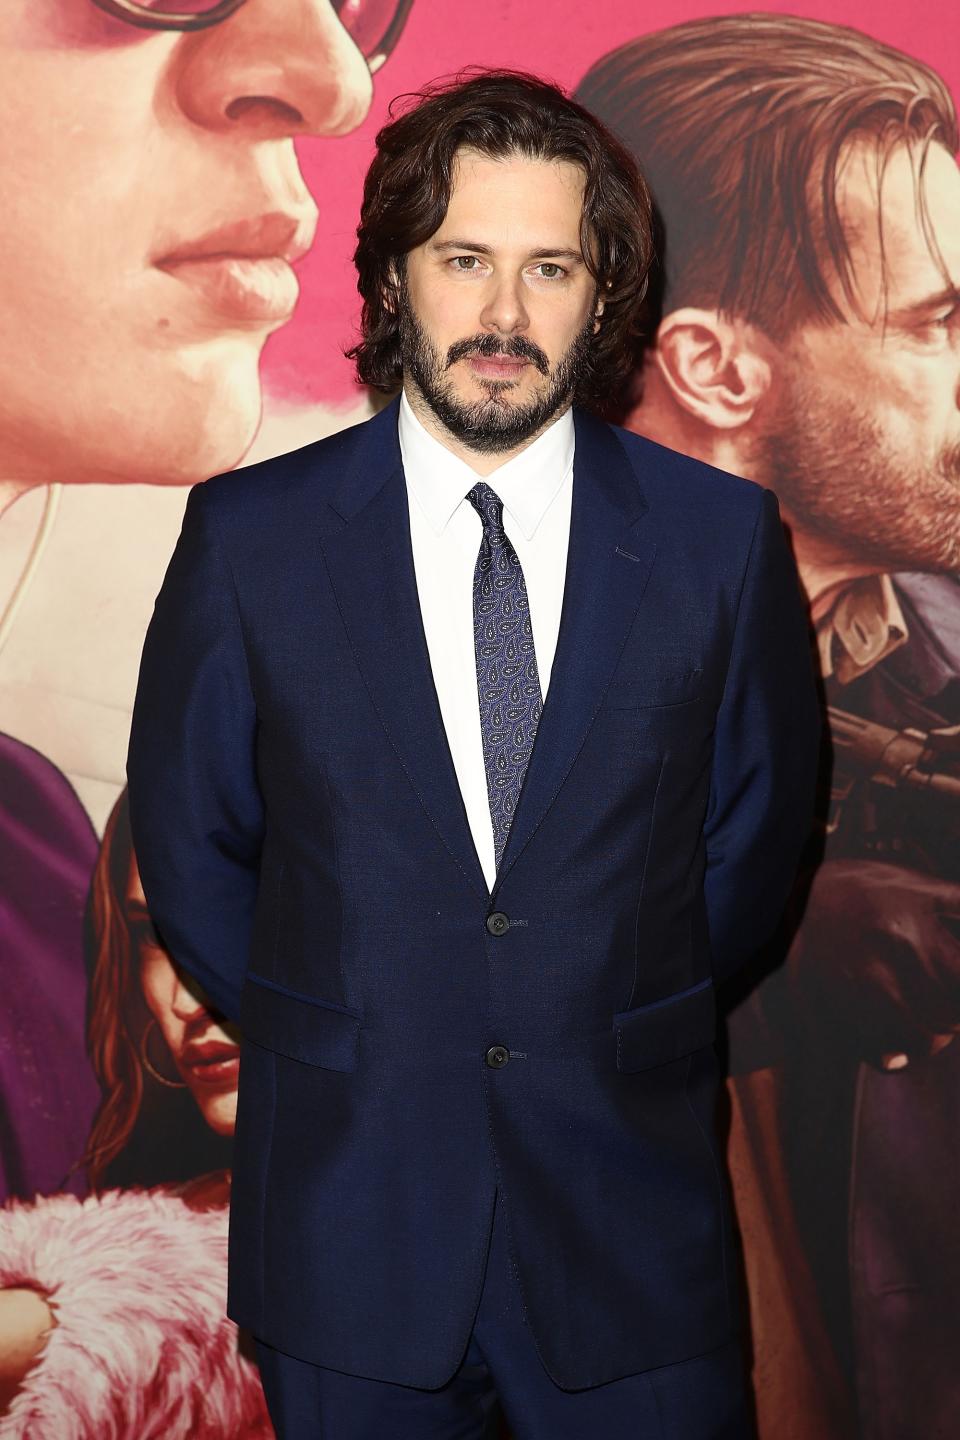 Edgar Wright arrives ahead of the 'Baby Driver' Australian Premiere in Sydney on July 12, 2017